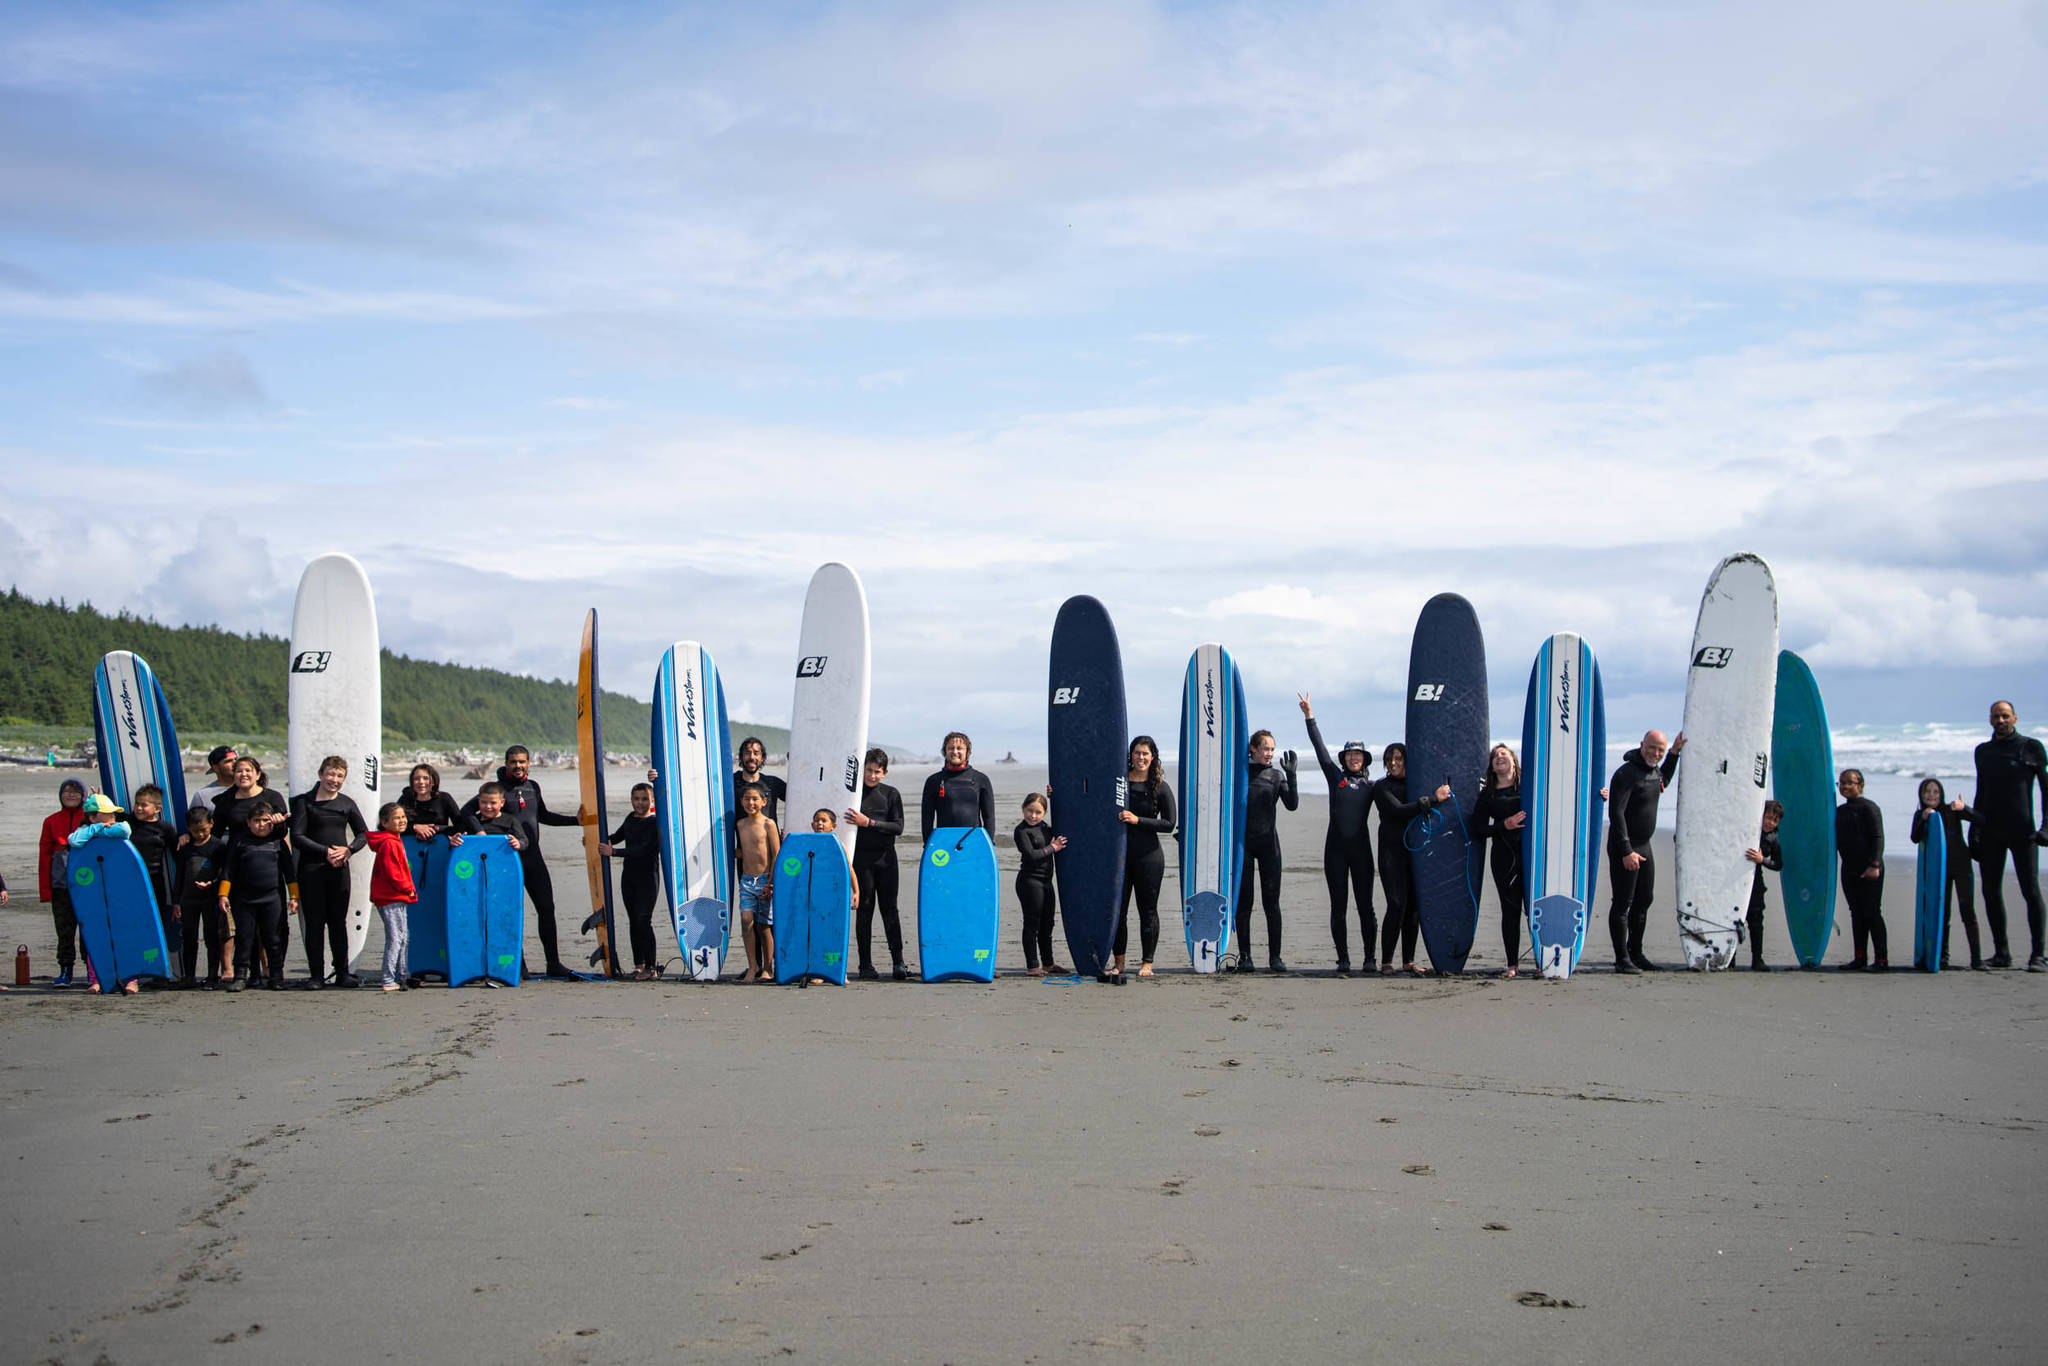 In July, Yakutat Surf Club kicked off their first camp of the summer. This is YSC’s third year supporting local youth in accessing Yakutat’s waves (Courtesy Photo / Bethany Sonsini Goodrich)